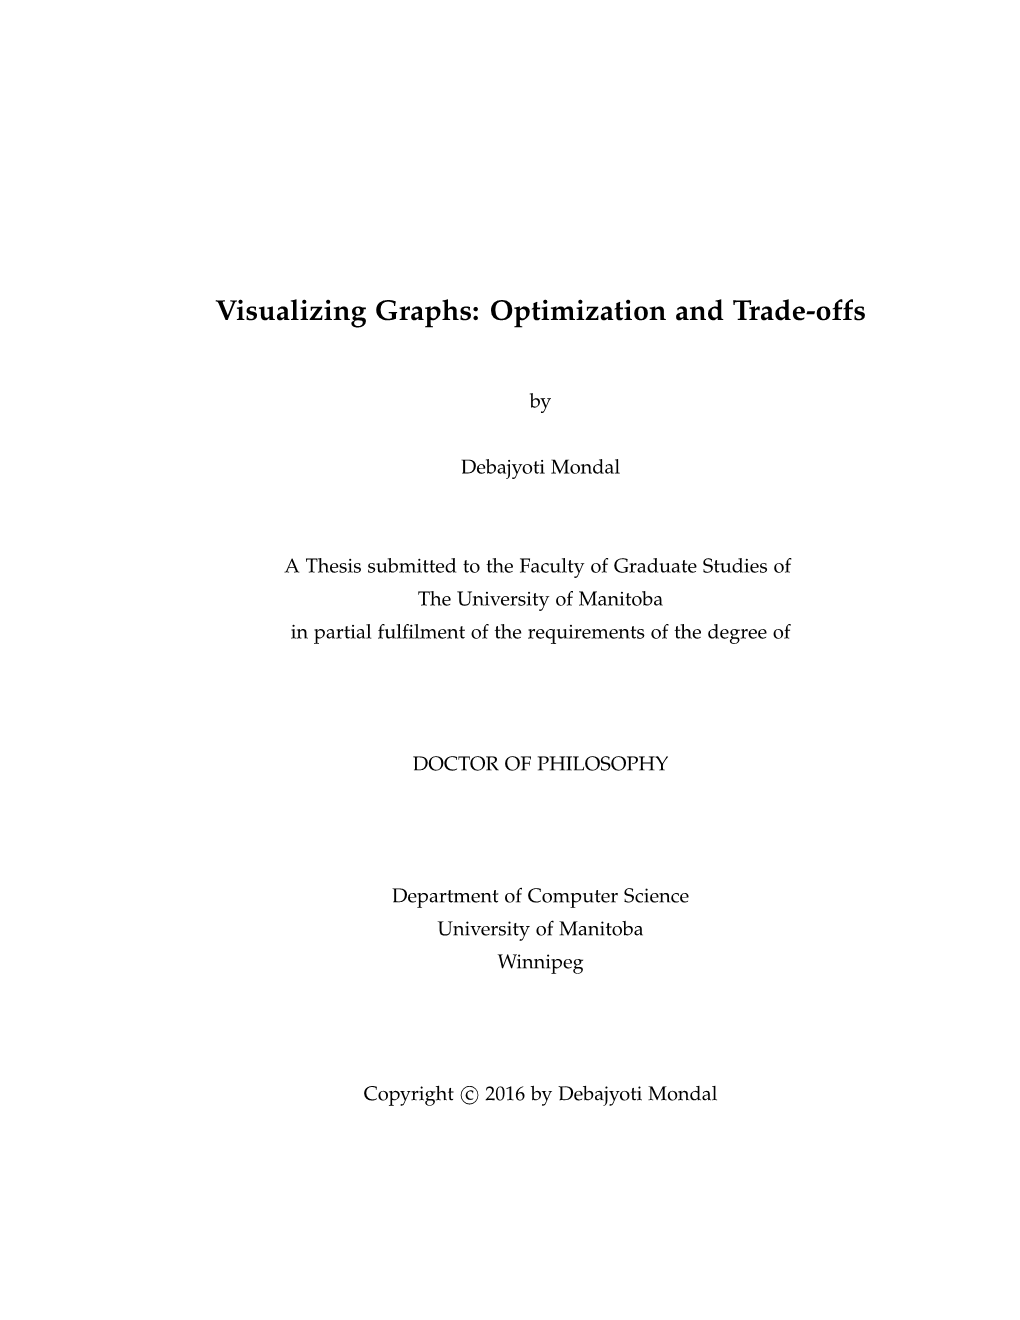 Visualizing Graphs: Optimization and Trade-Offs